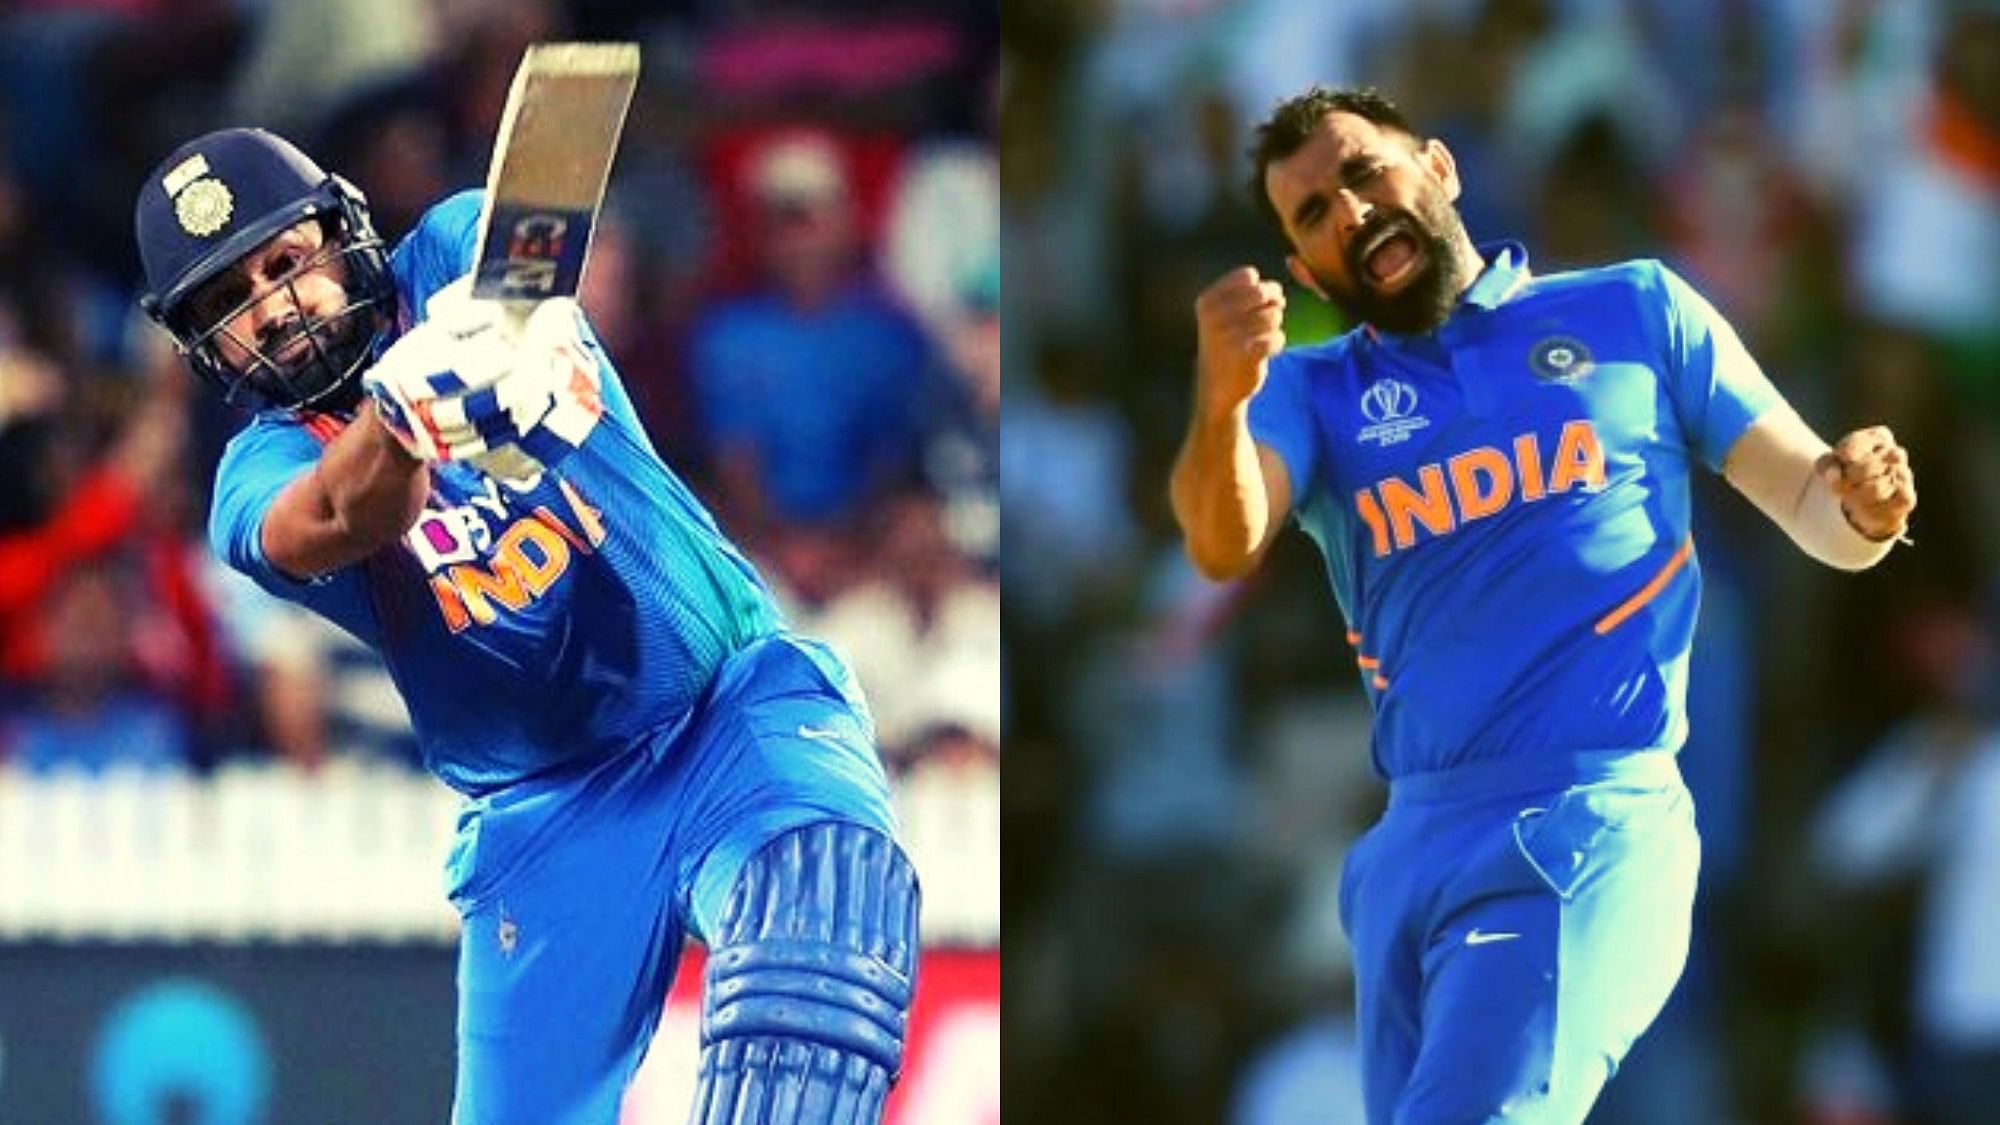 Rohit Sharma (left) finished things off in style for India after Mohammed Shami’s excellent last over had helped India tie the third T20I against New Zealand on Wednesday, 29 January.